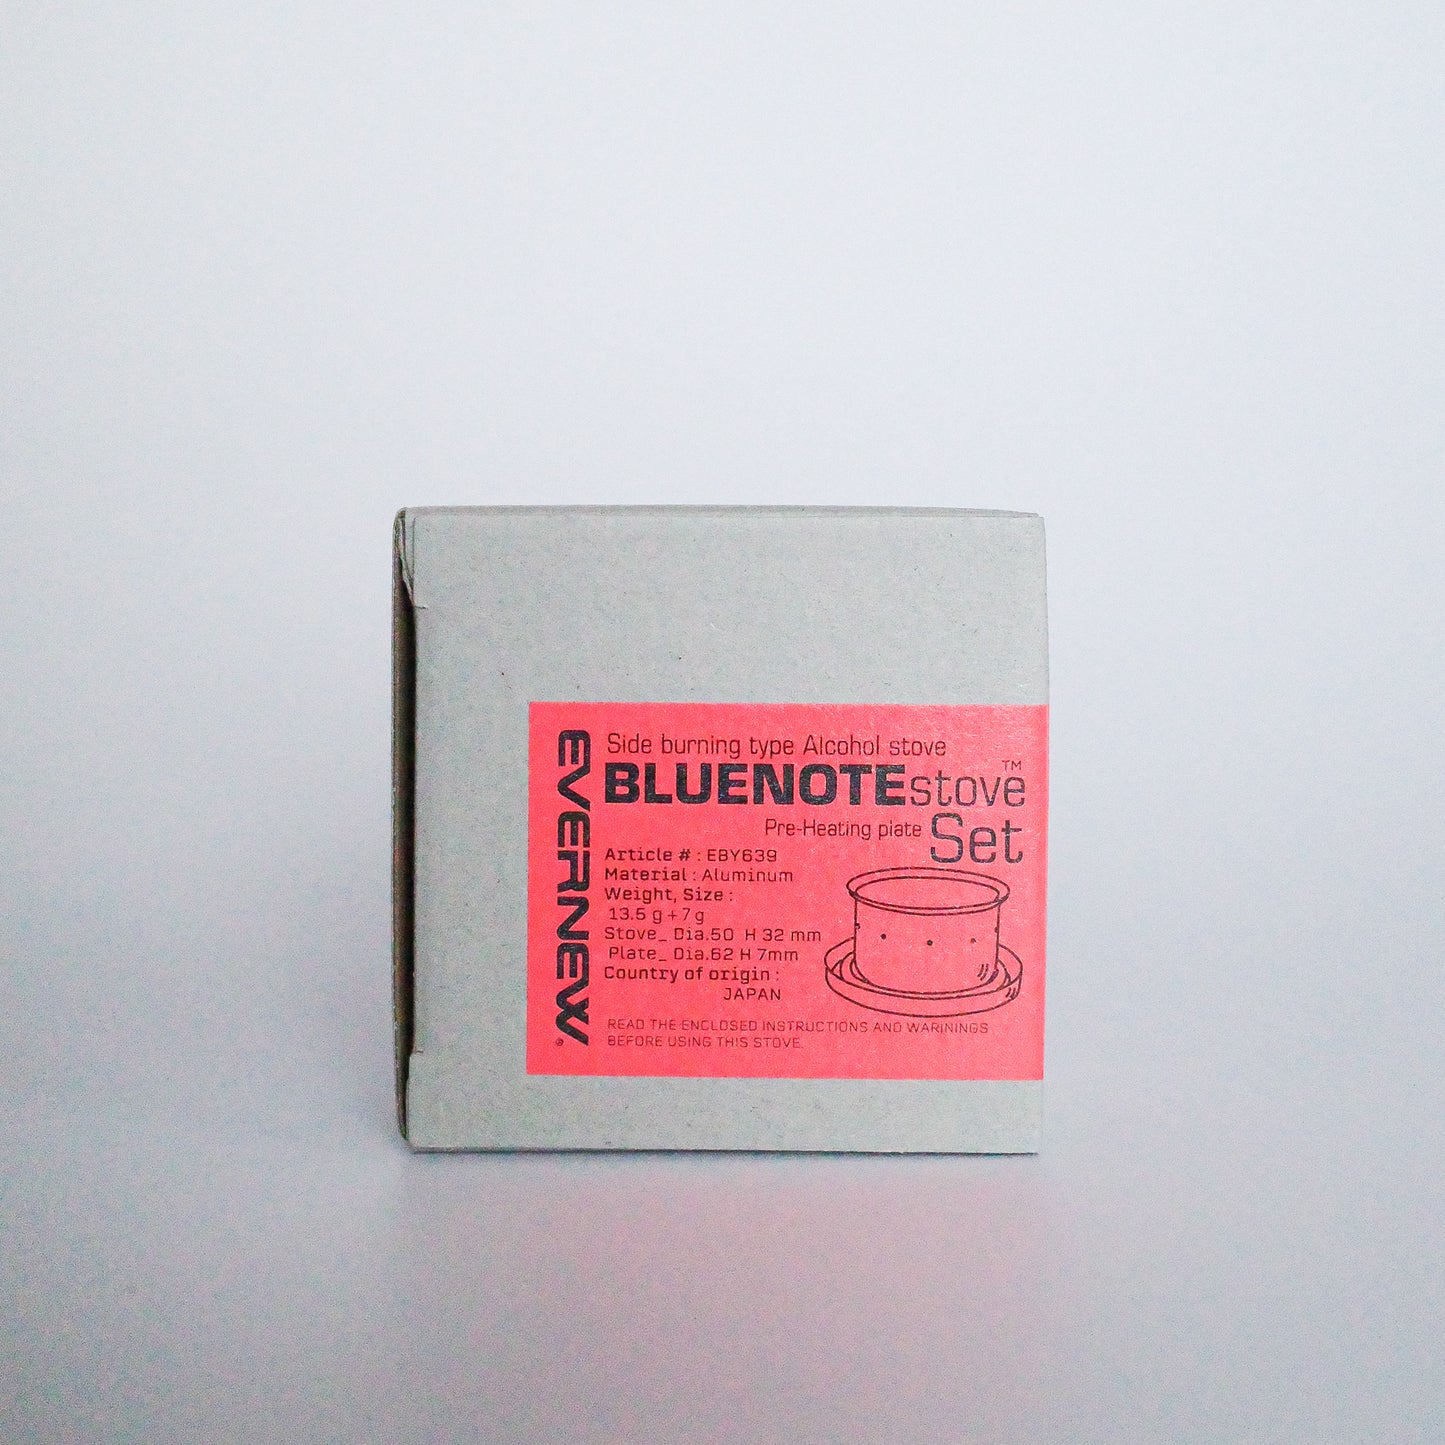 EVERNEW | BLUENOTE stove w/ Pre-Heating plate Set